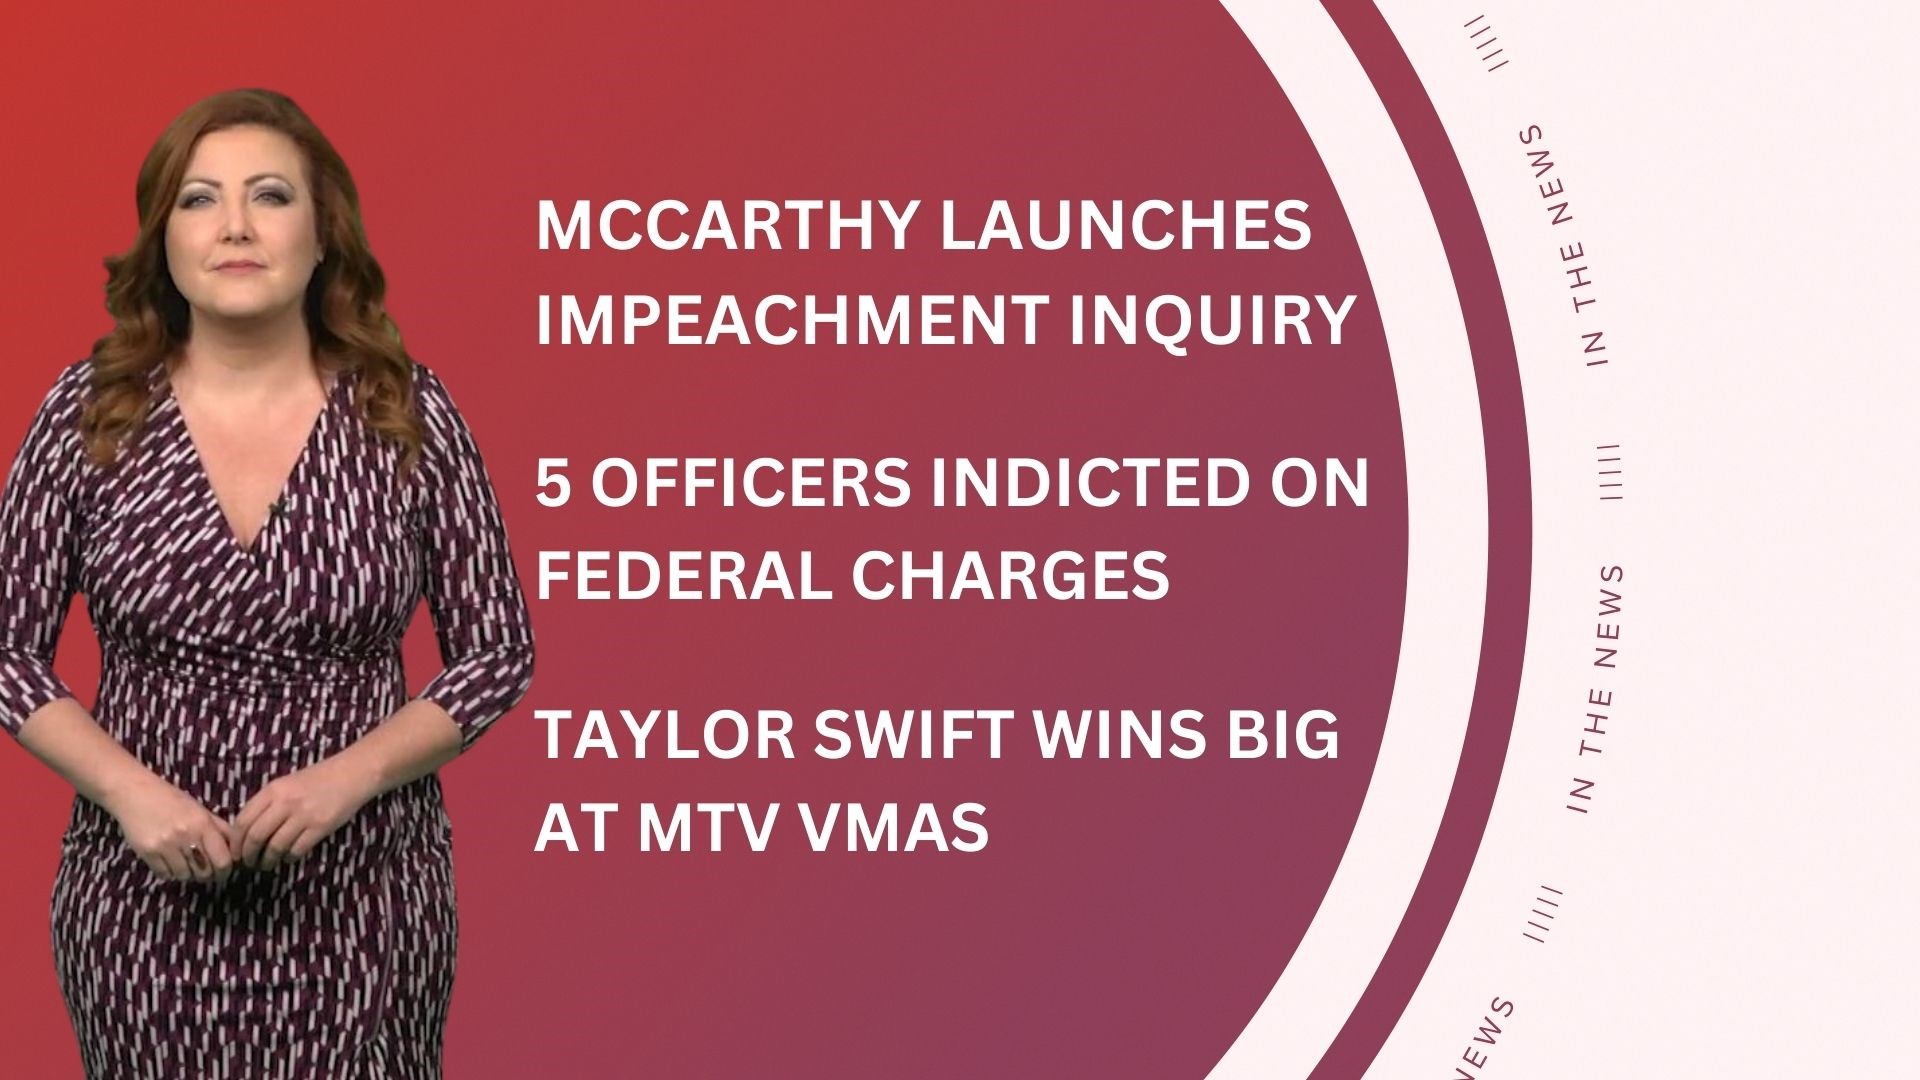 A look at what is happening in the news from Sen. McCarthy launching an impeachment inquiry into President Biden and Taylor Swift wins big at the MTV VMAs.